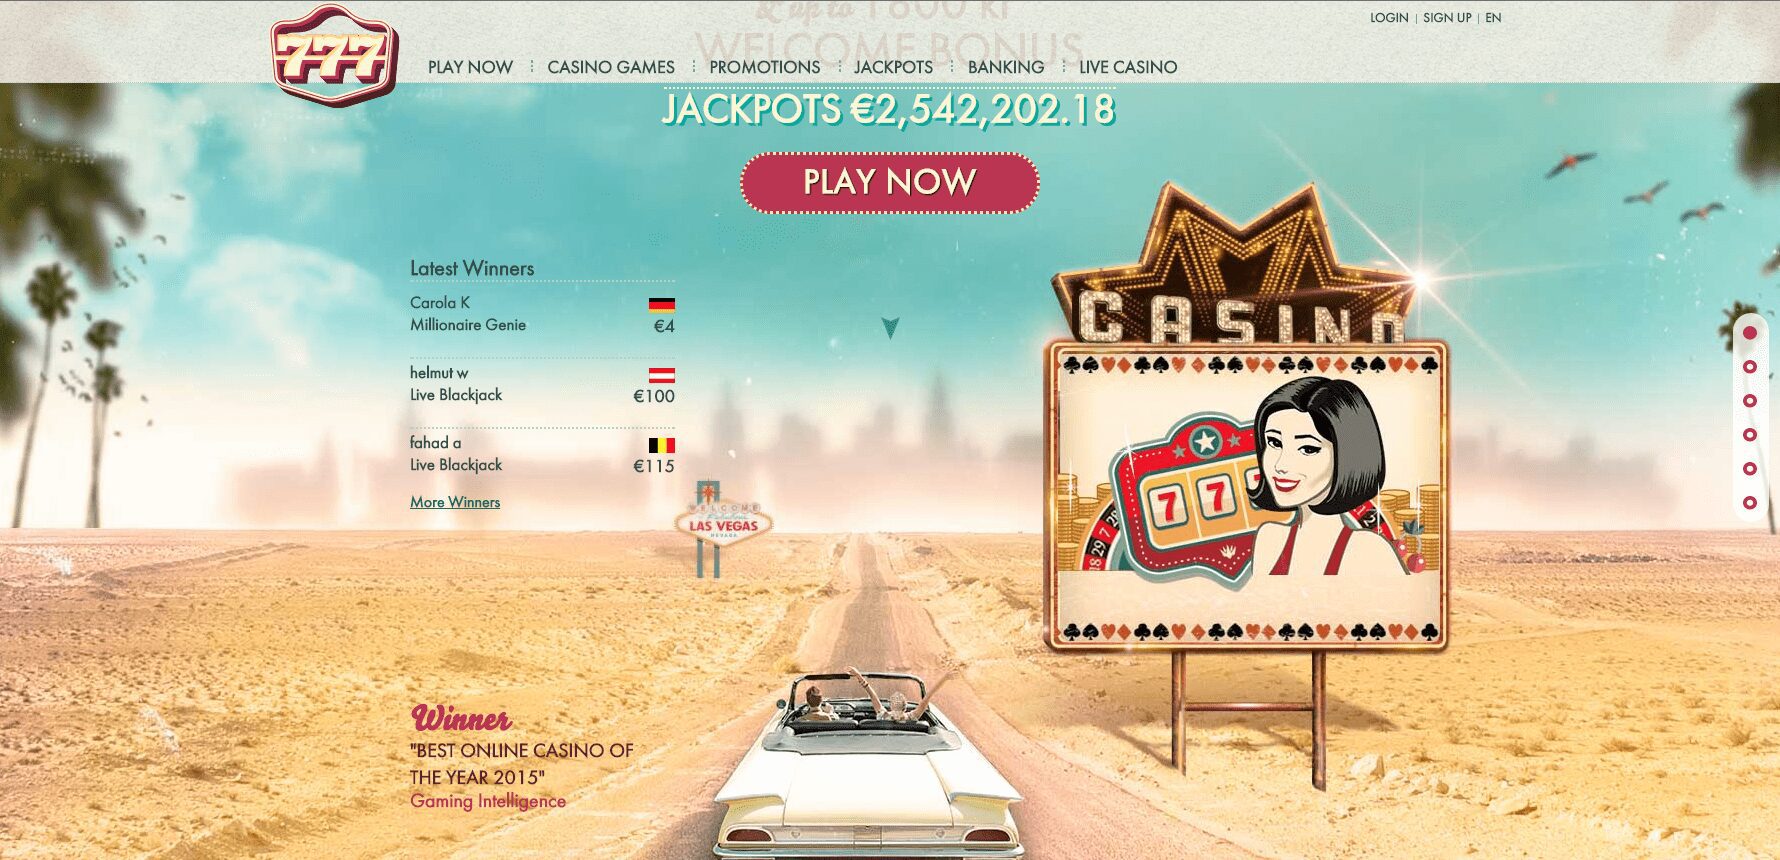 Top 10 Slot Games to Play at 777 Online Casino